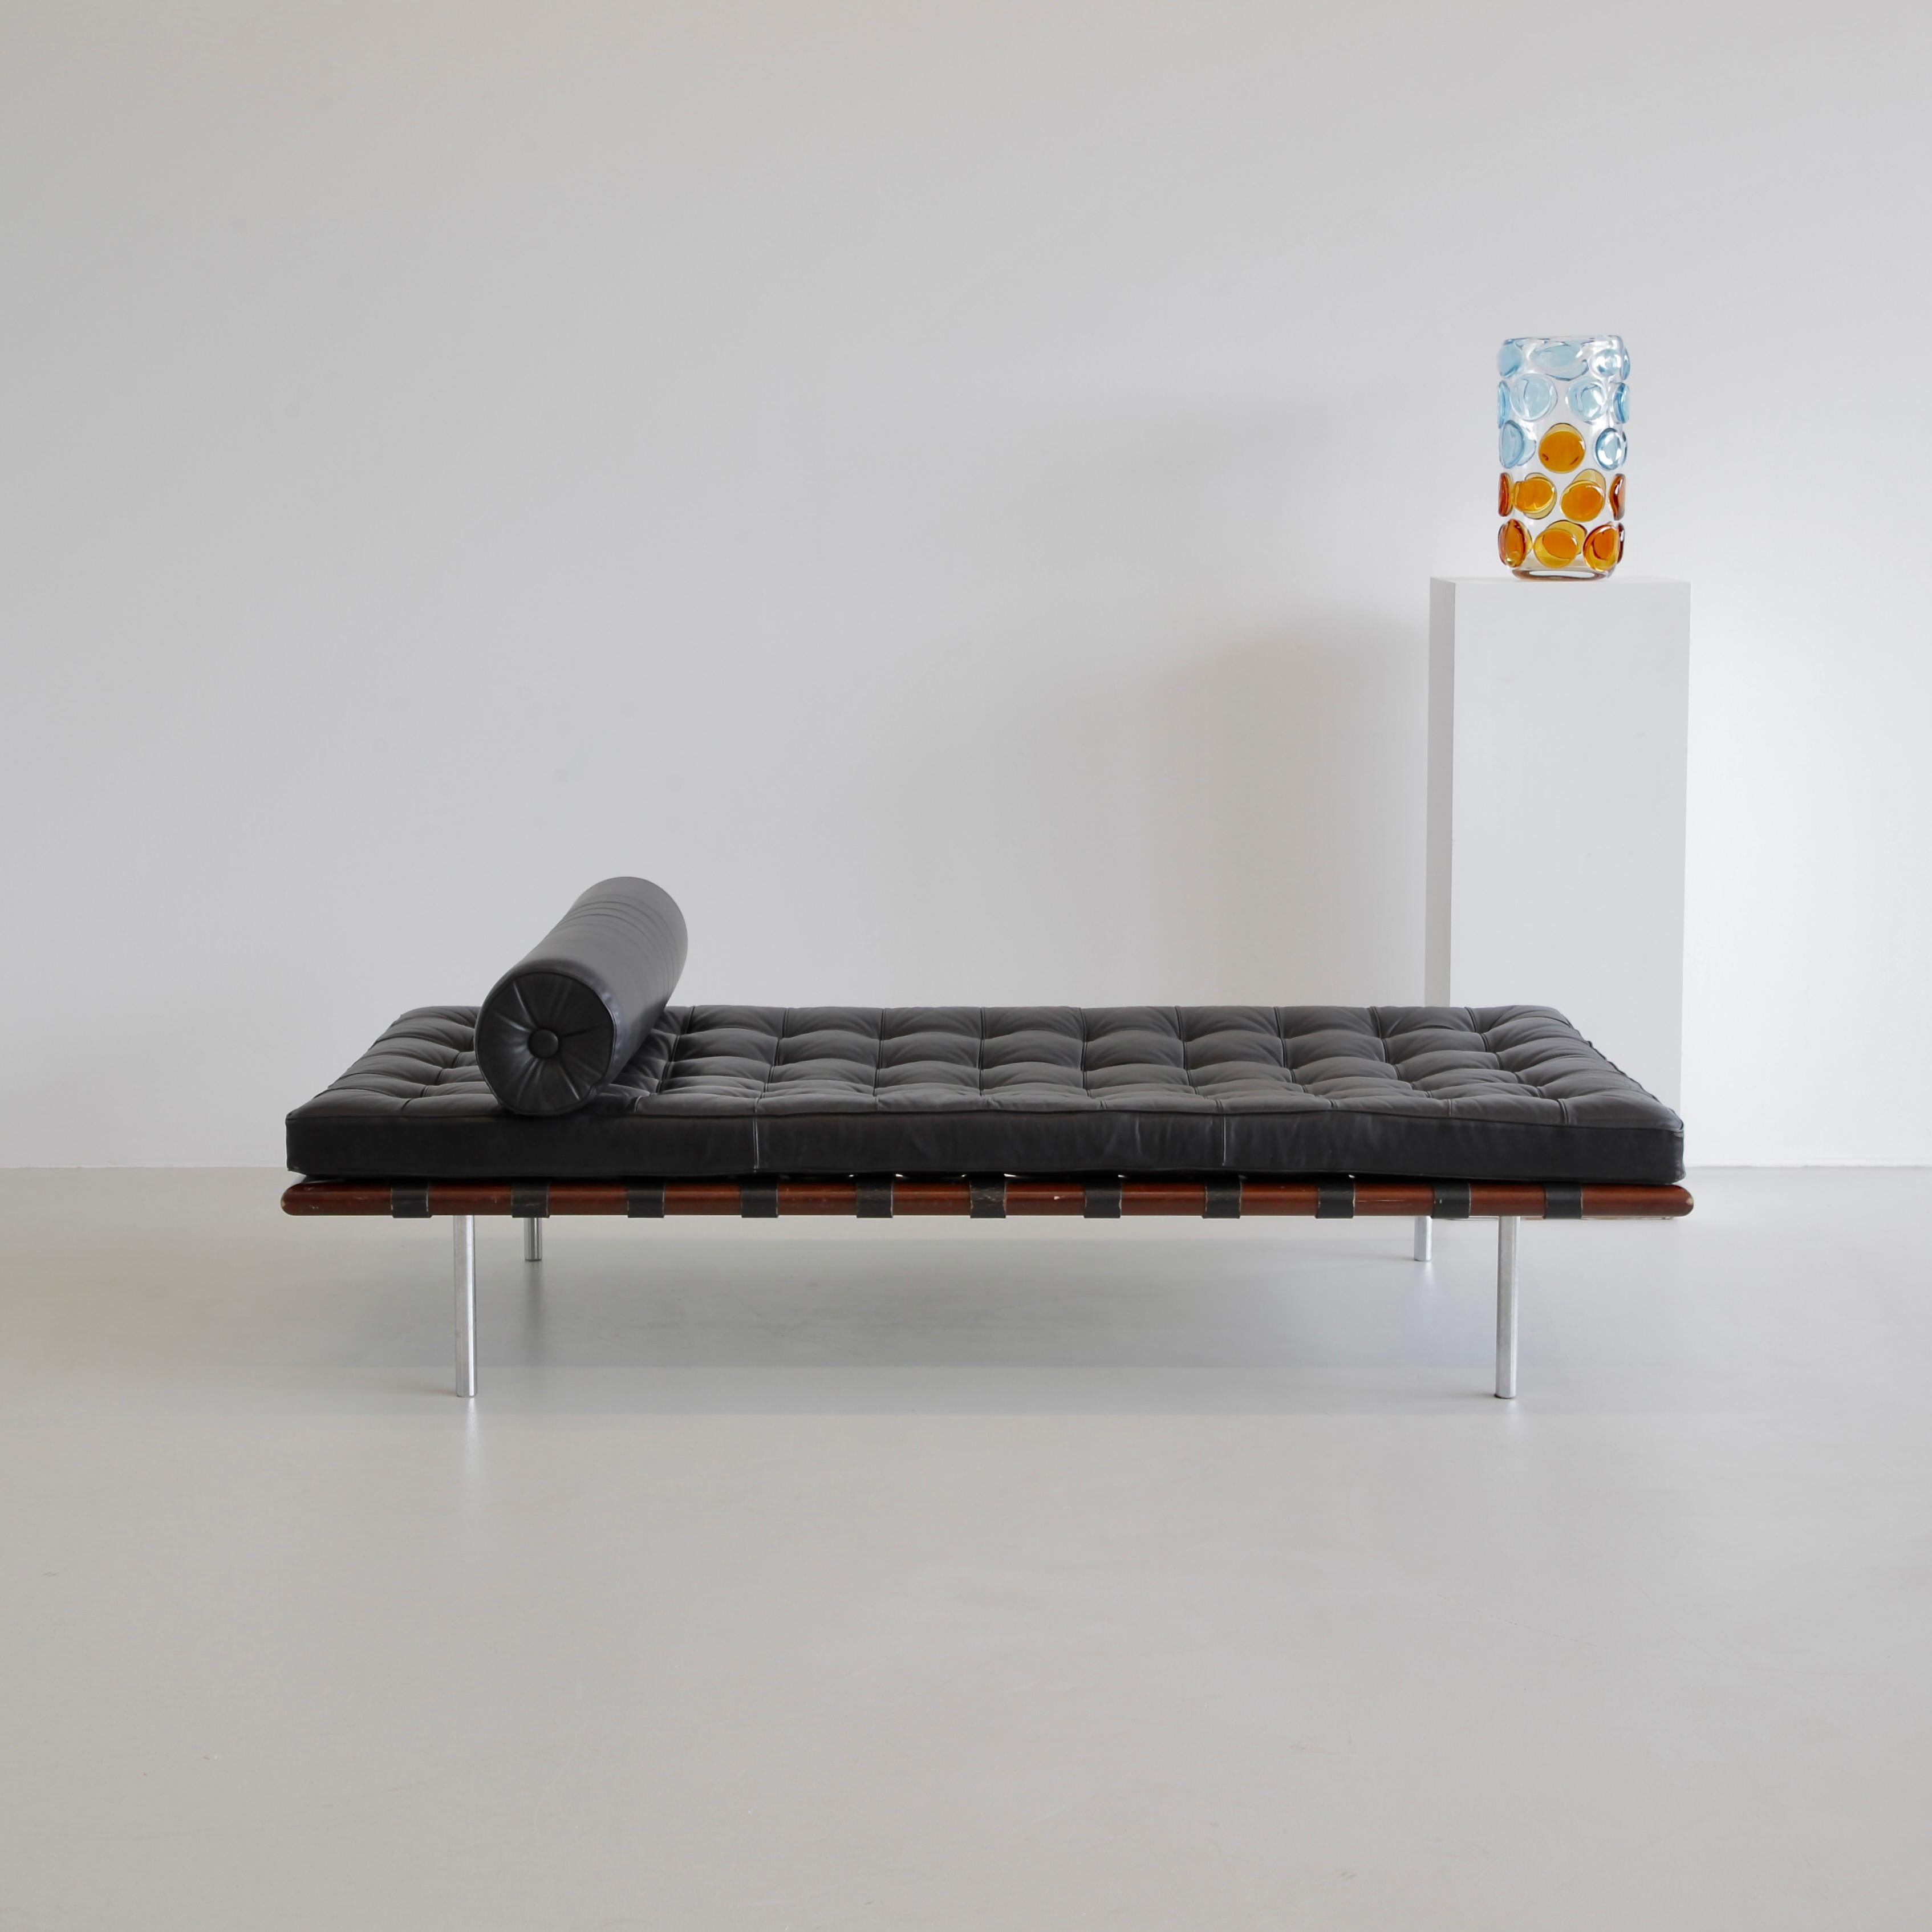 Leather Barcelona Day Bed, Designed by Mies van der Rohe